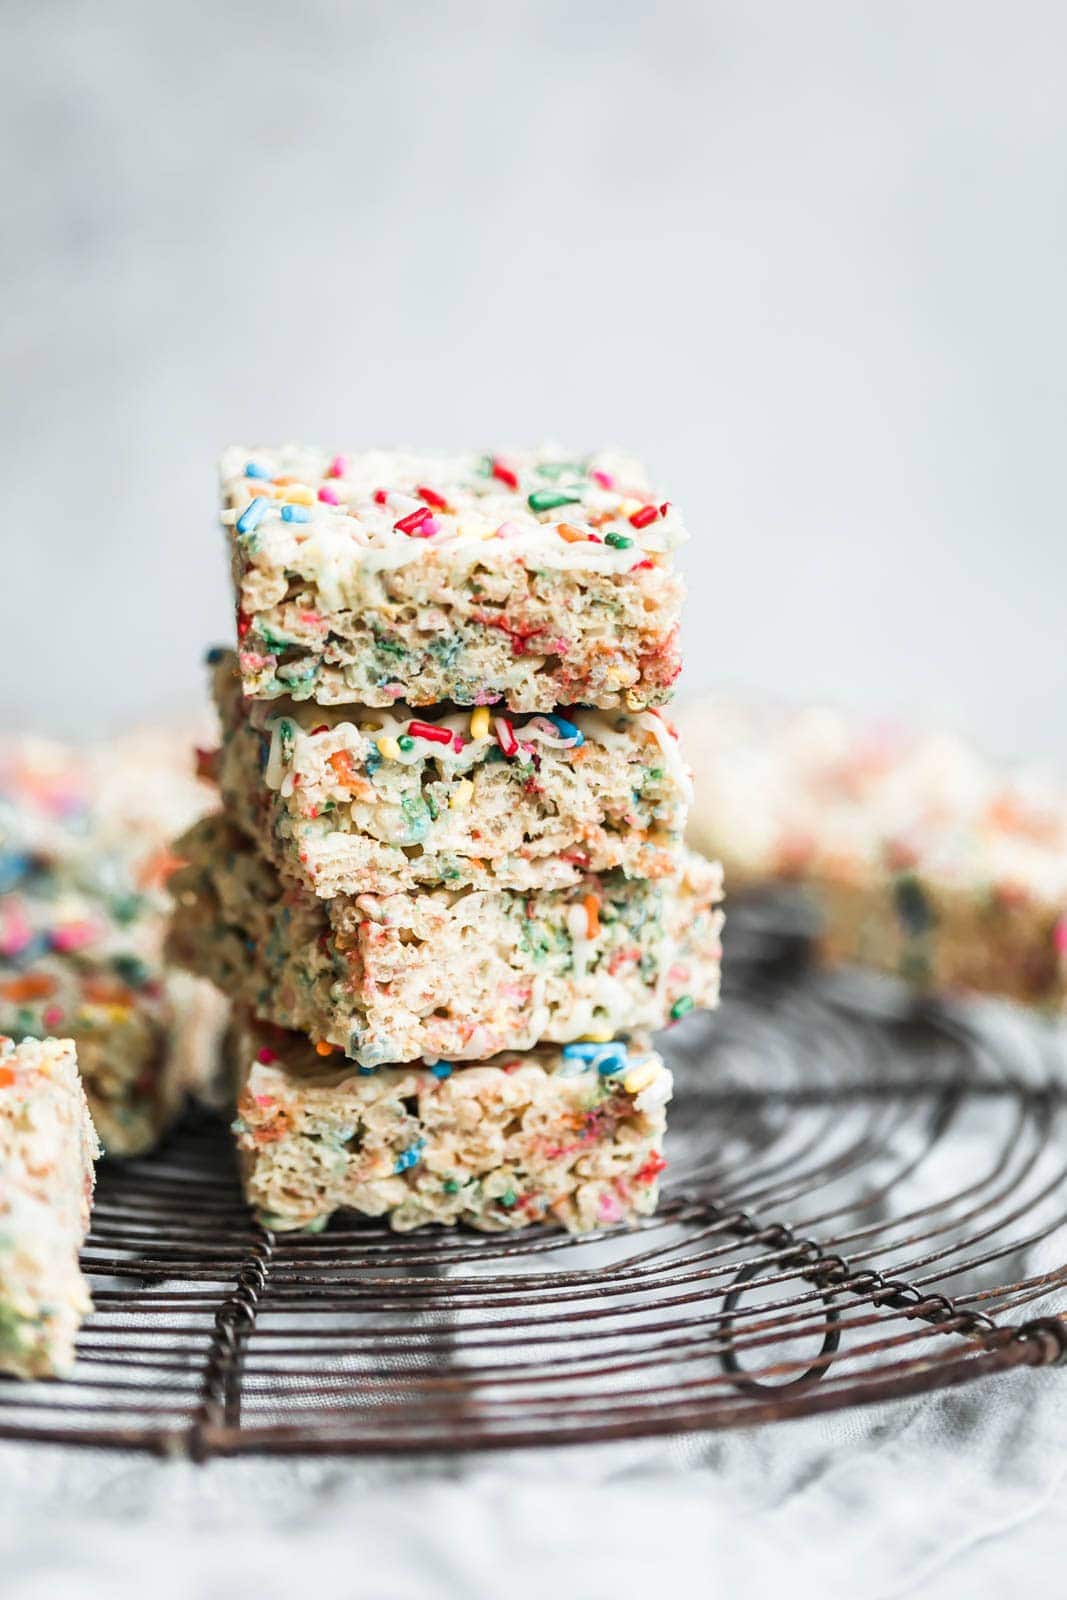 The easiest, prettiest White Chocolate Funfetti Rice Krispie Treats ever! Made with only 5 ingredients, these babies come together in just minutes!